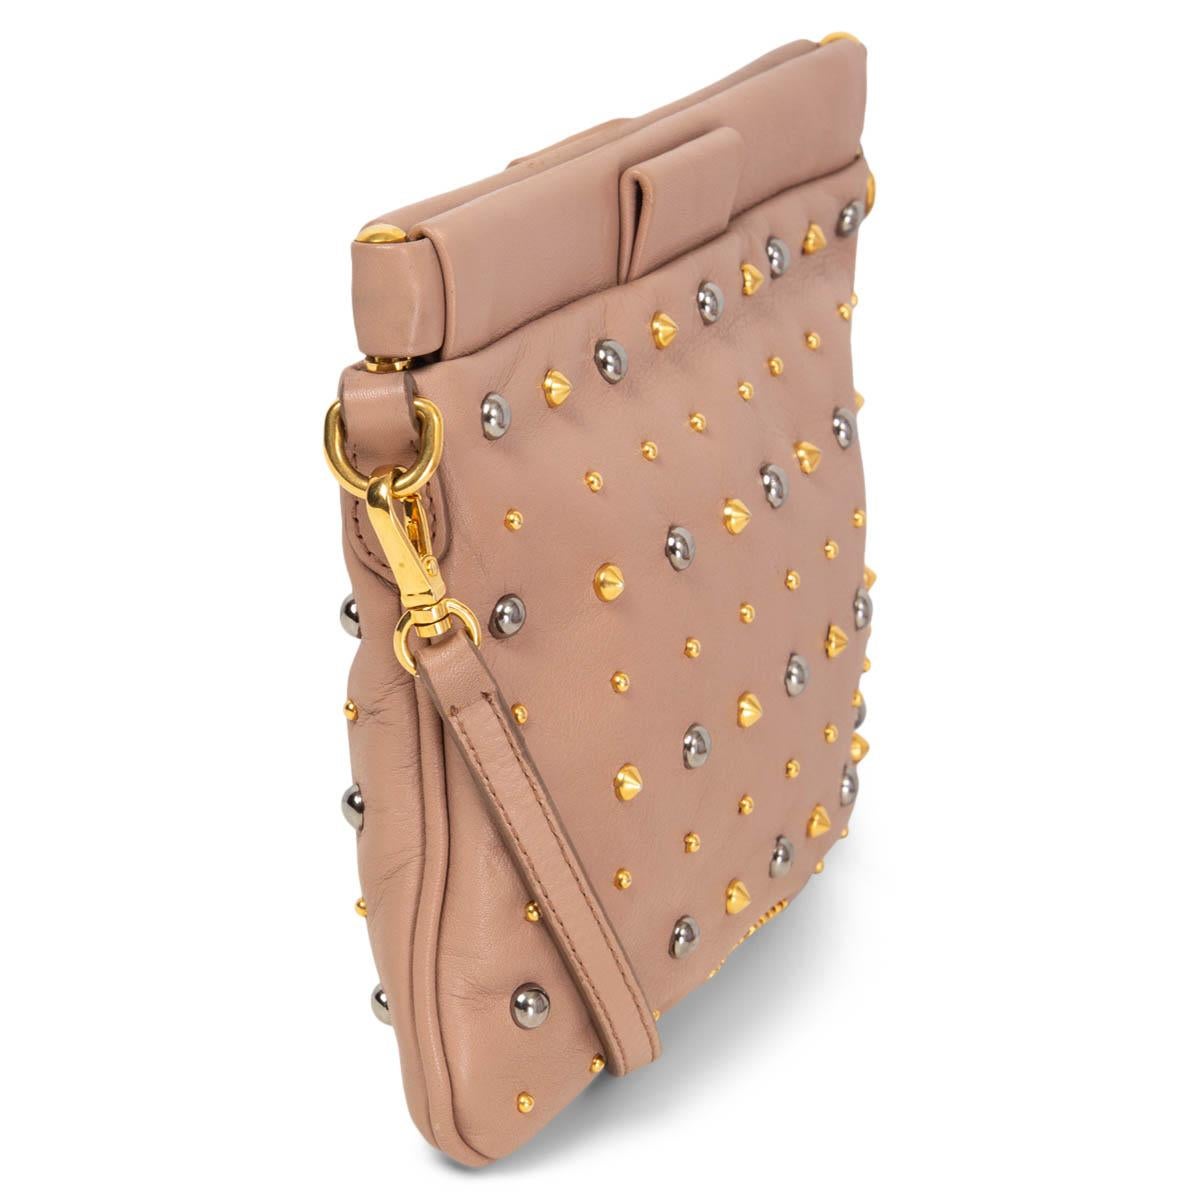 100% authentic Miu Miu Small Studded Crossbody Bag in dusty rose leather. Lined in grey satin with one patch pocket against the back. Has been carried and is in excellent condition. Comes with dust bag. 

Measurements
Height	14cm (5.5in)
Width	19cm